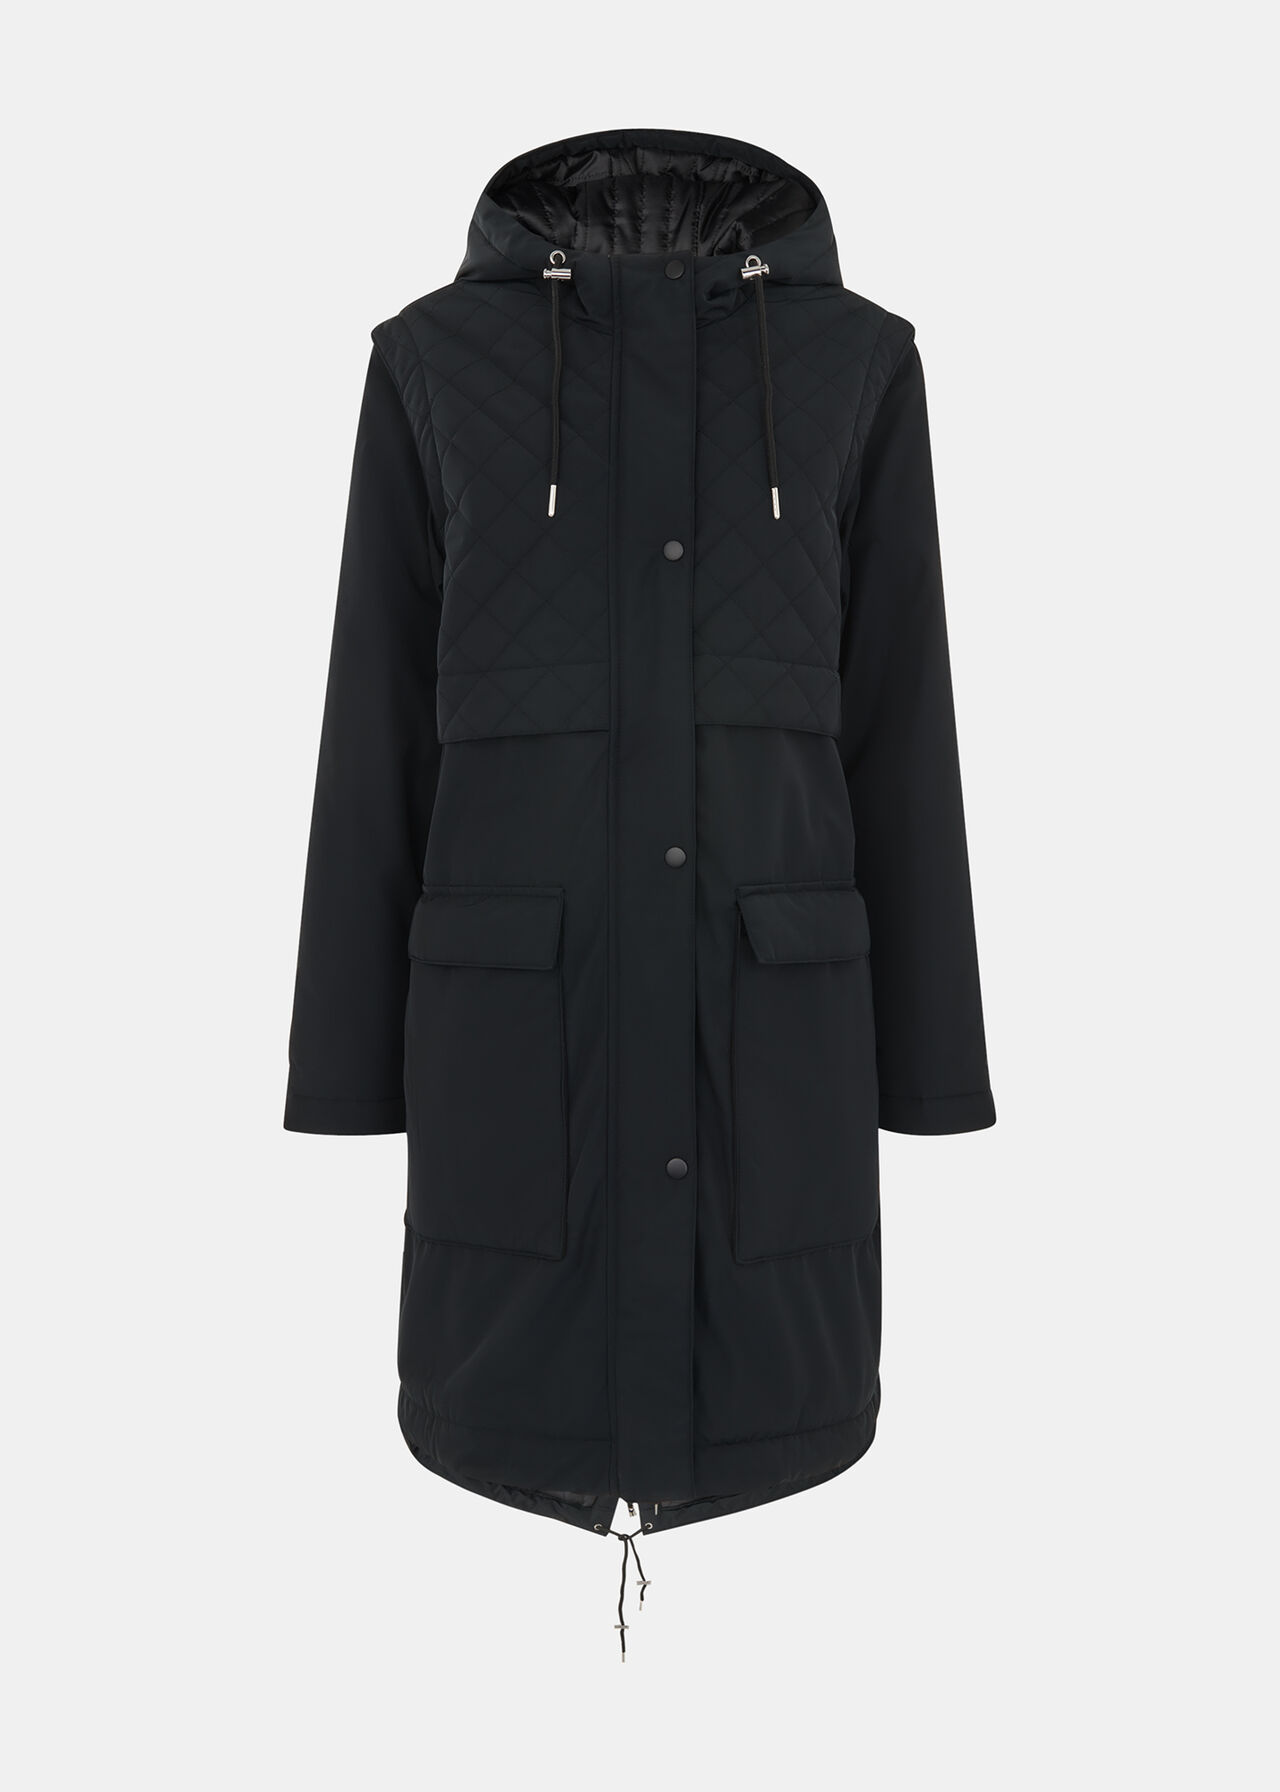 Black Quilted Parka Coat with a Hood | Whistles